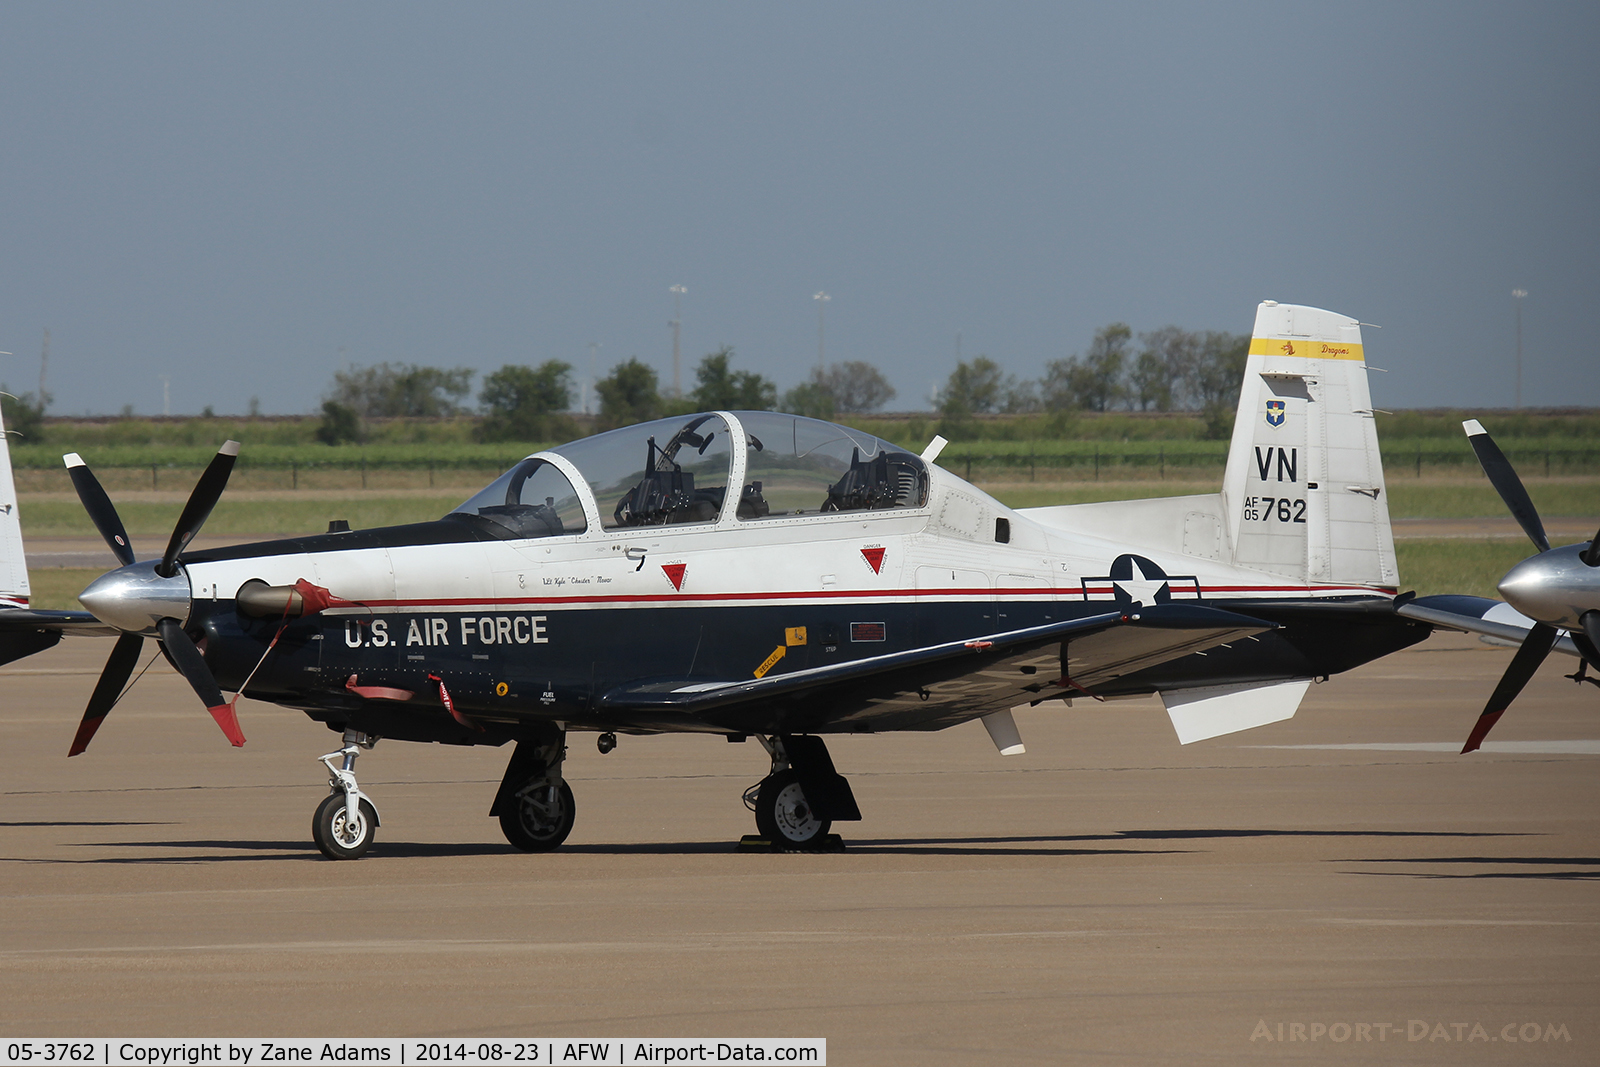 05-3762, 2005 Raytheon T-6A Texan II C/N PT-314, On the ramp at Alliance Airport - Fort Worth, TX